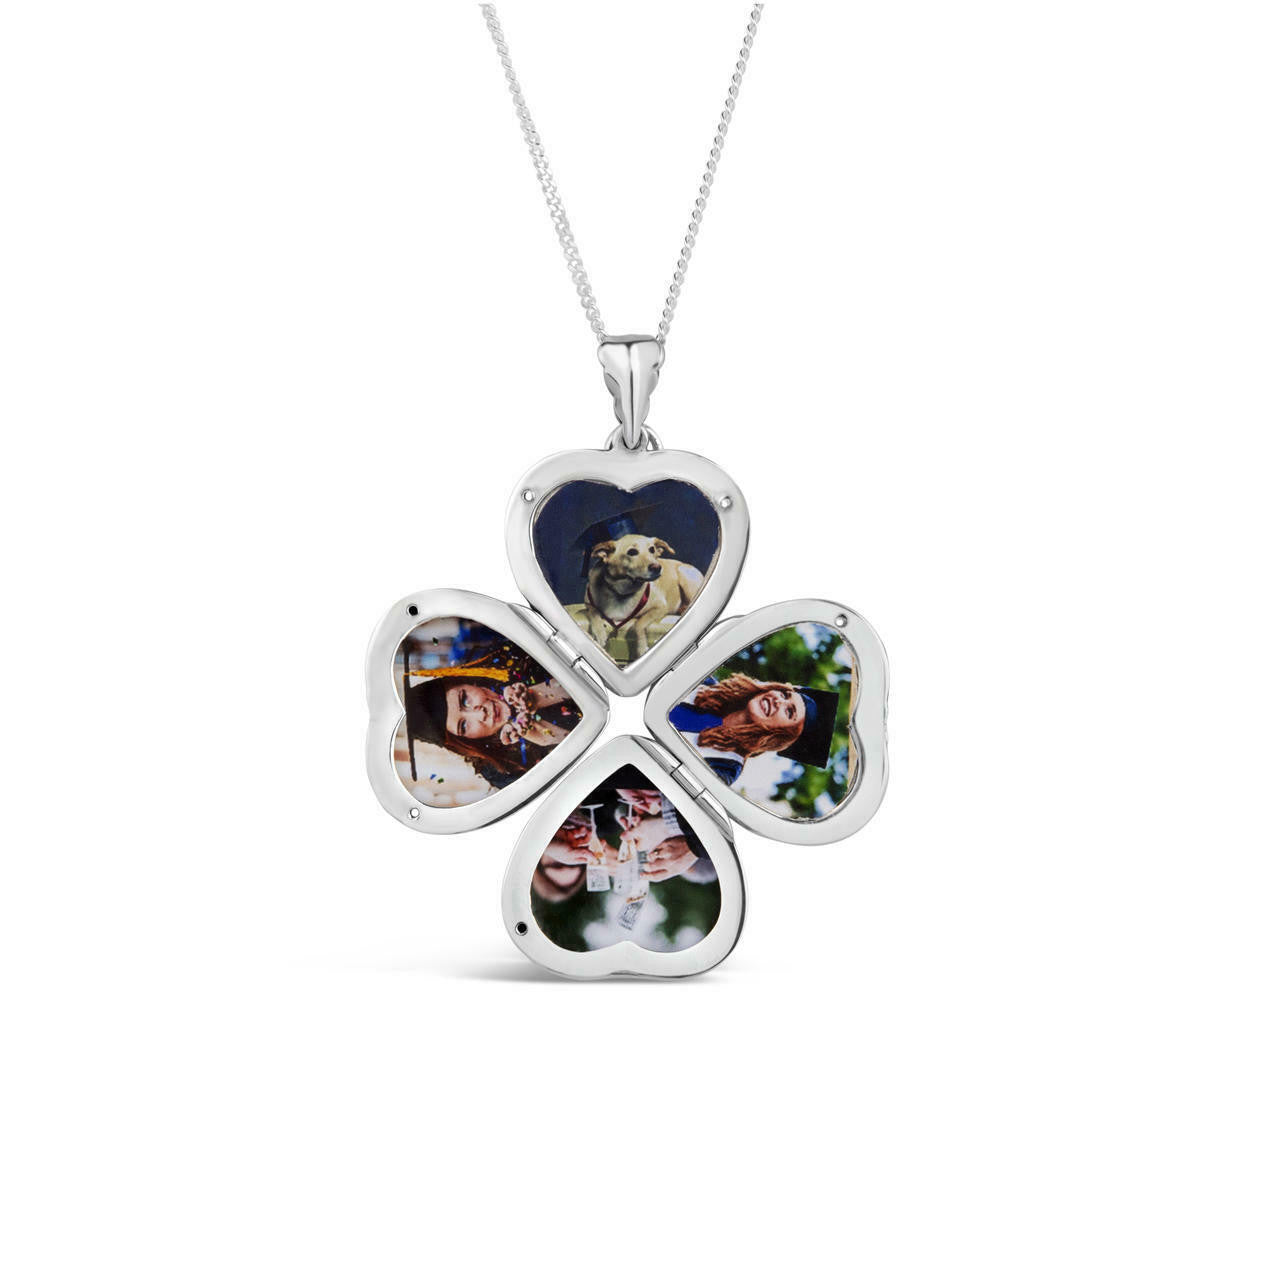 Lily Blanche silver heart shaped locket with four photos